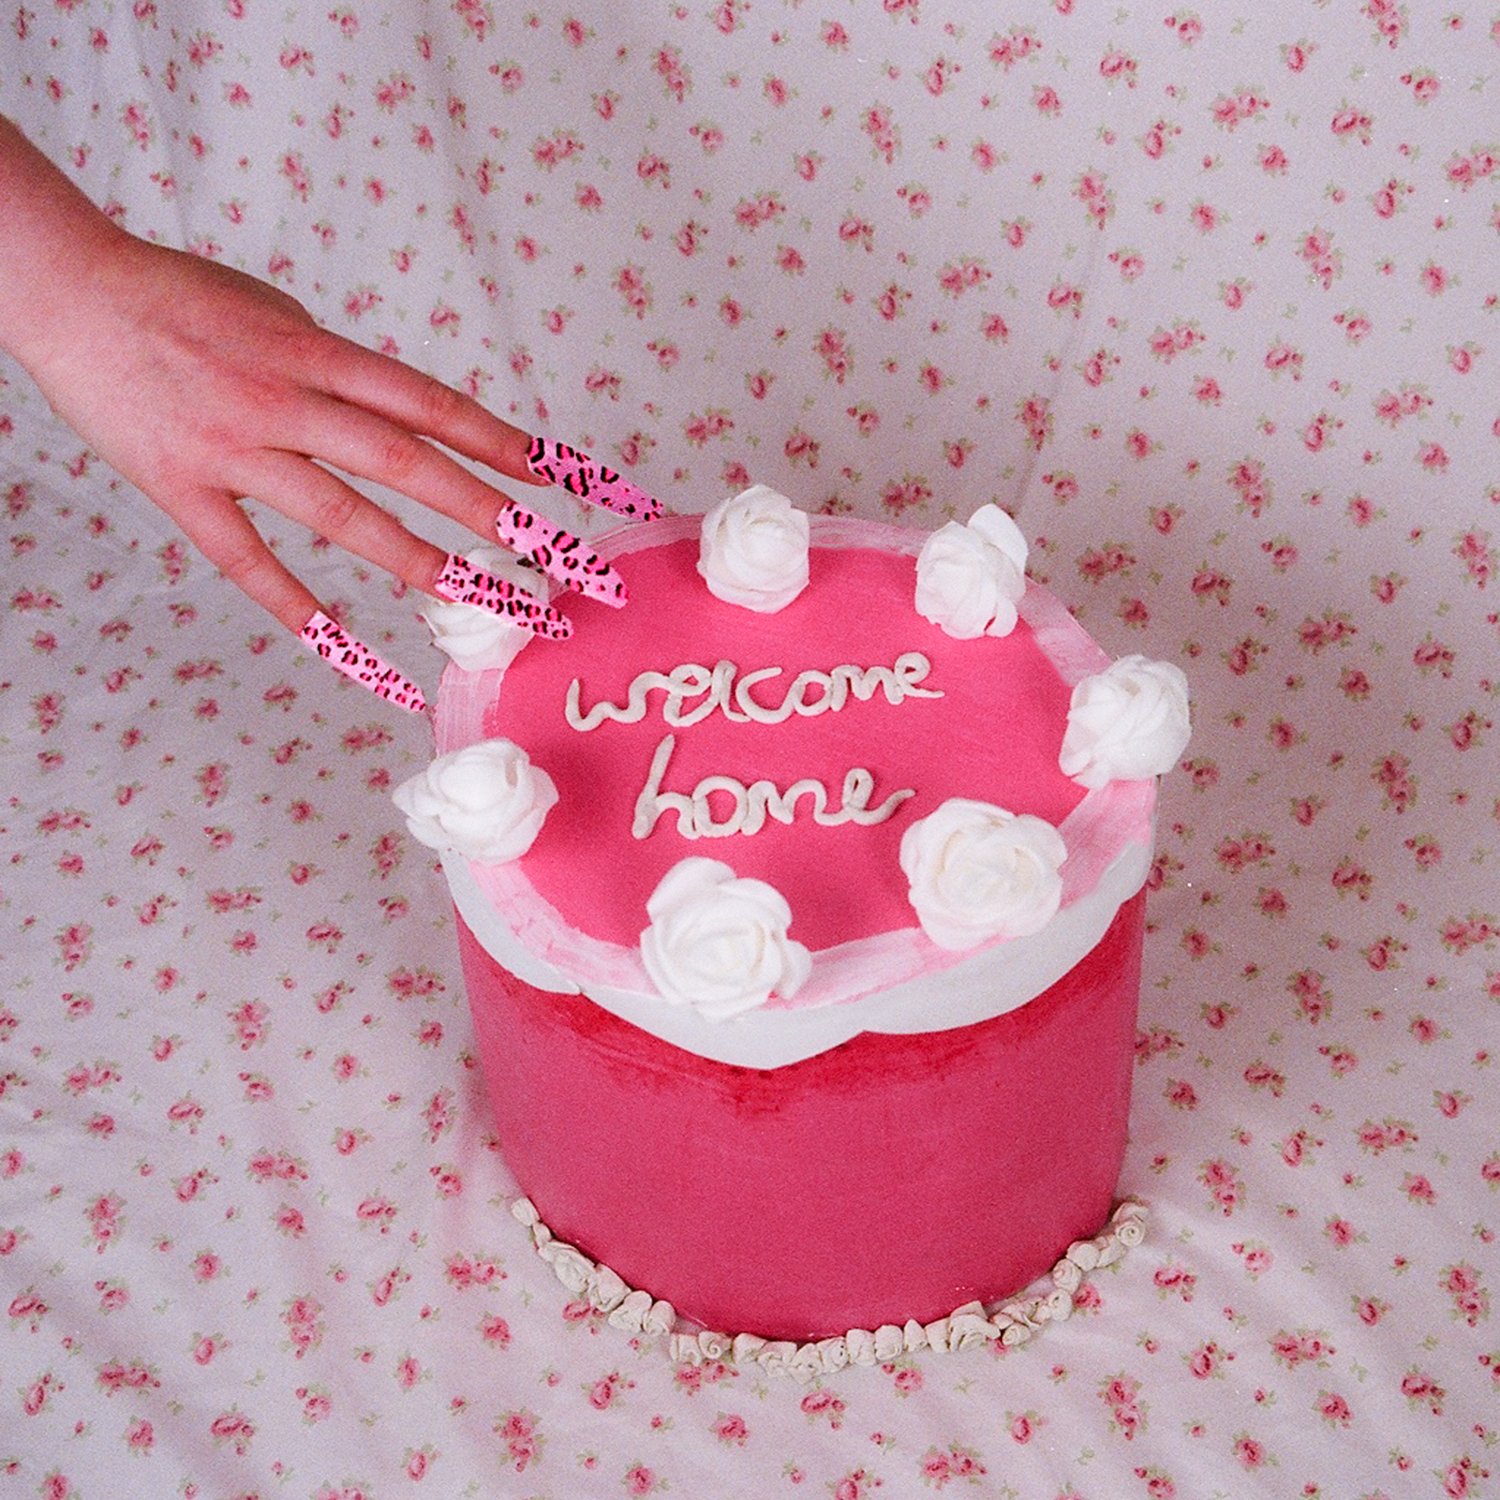 Colour photograph depicting hand with cardboard nails reaching for cardboard cake.